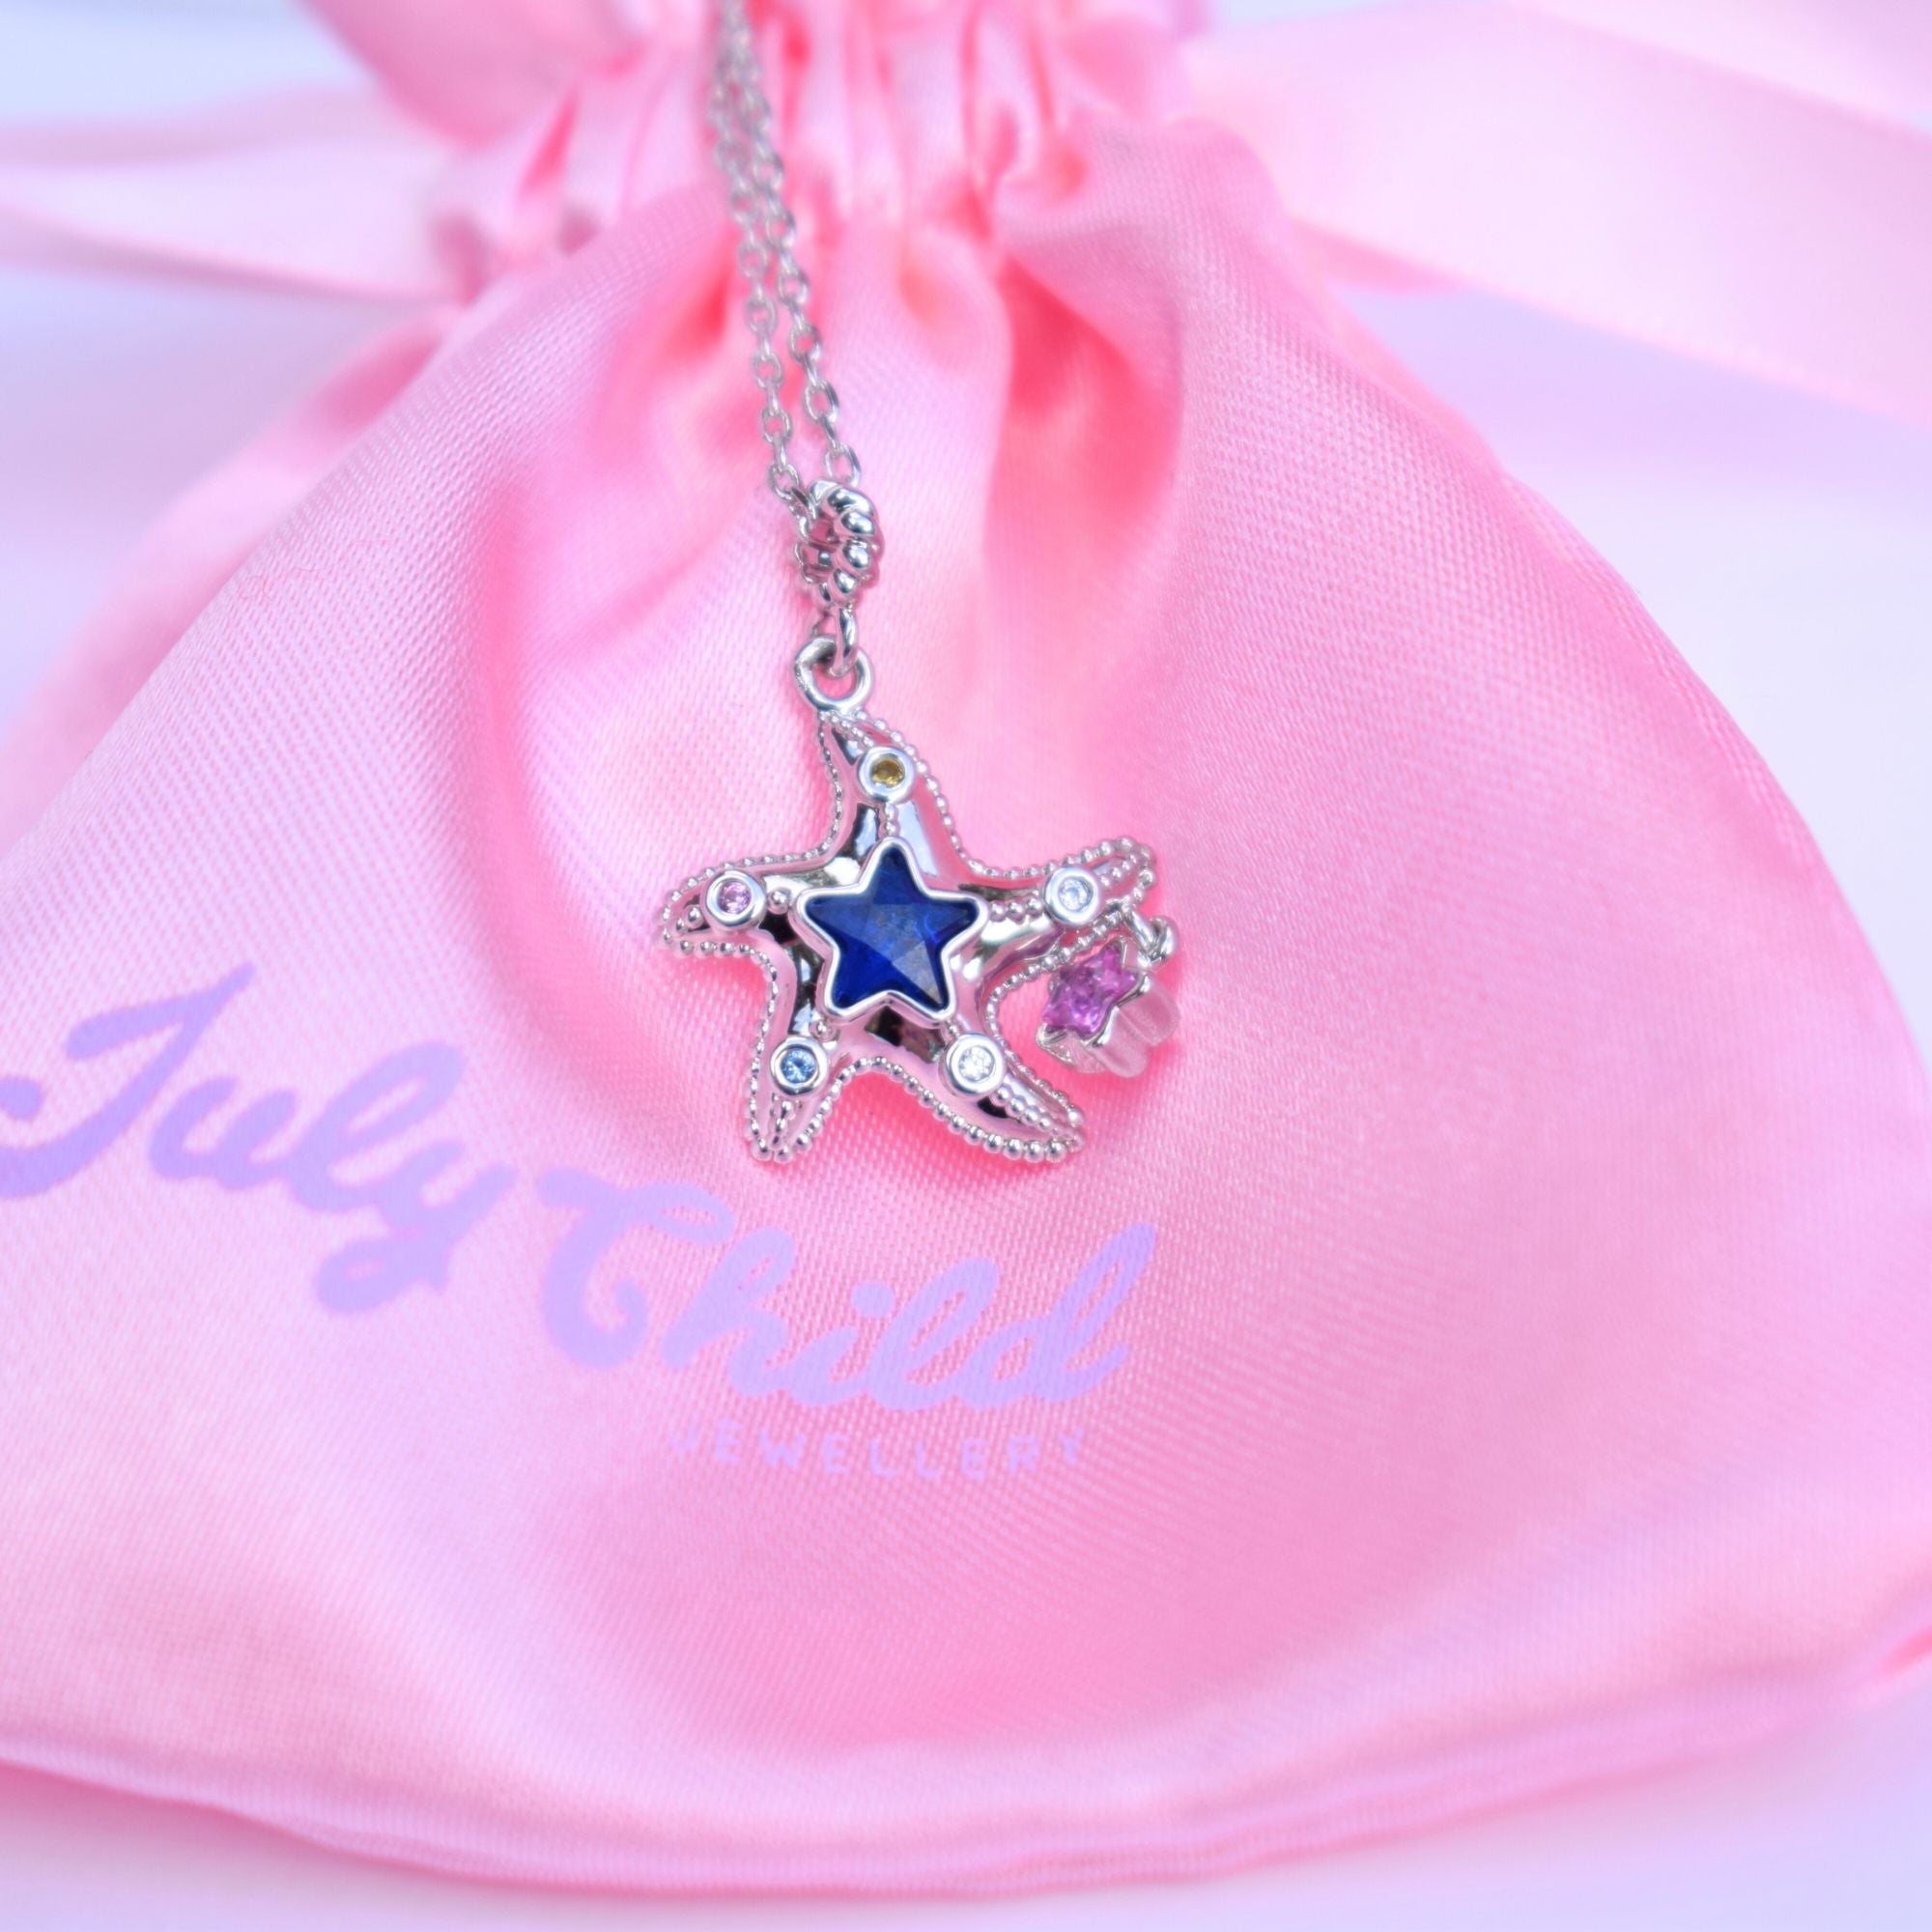 Starfish Silver Necklace